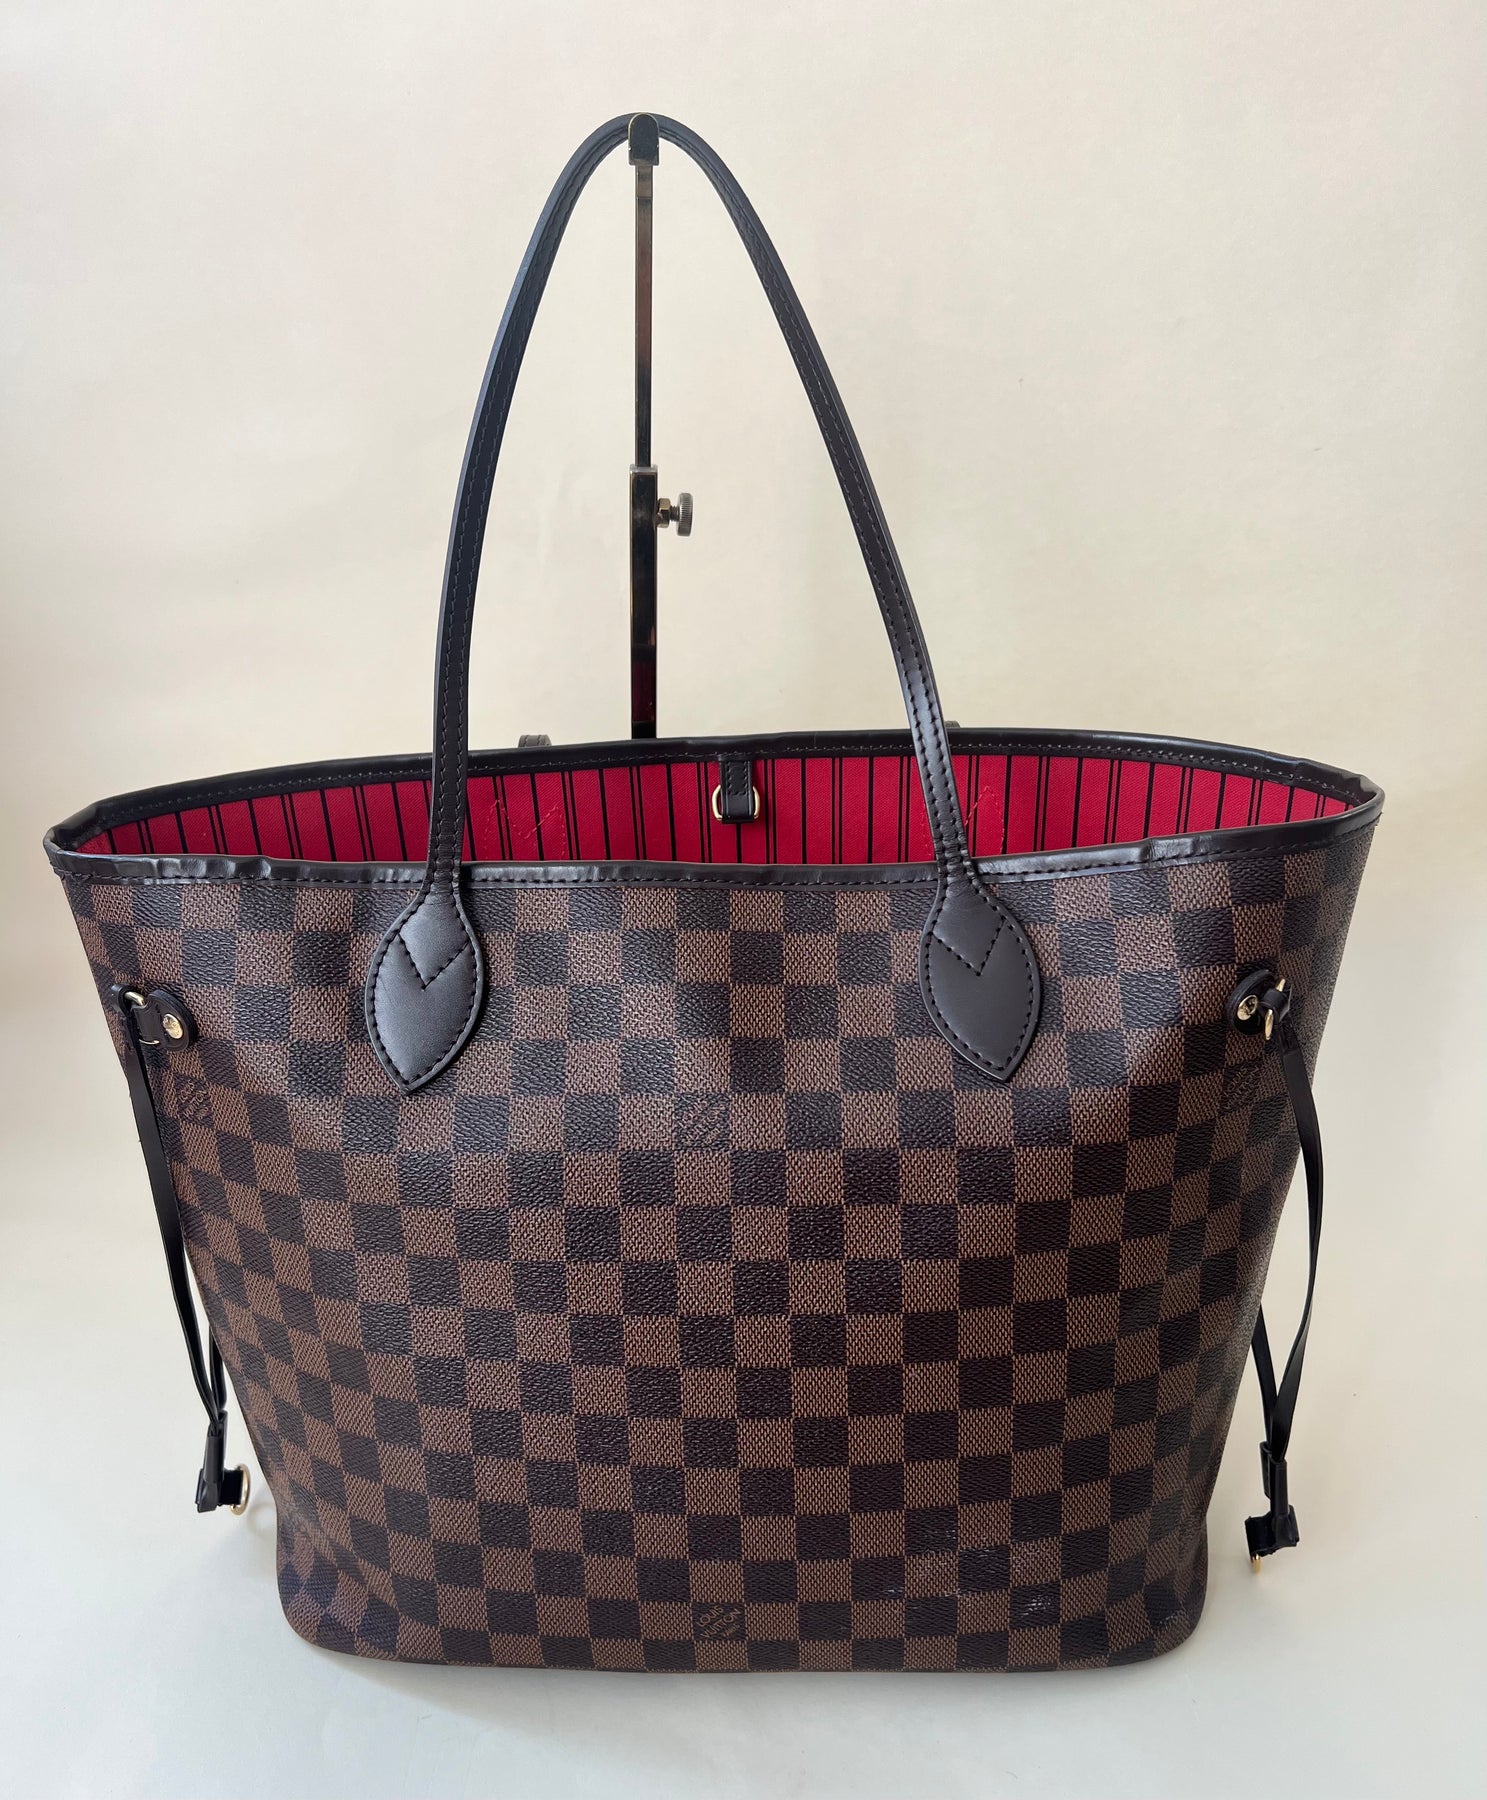 Four Ways to Tie a Bandeau on Louis Vuitton Neverfull and Speedy